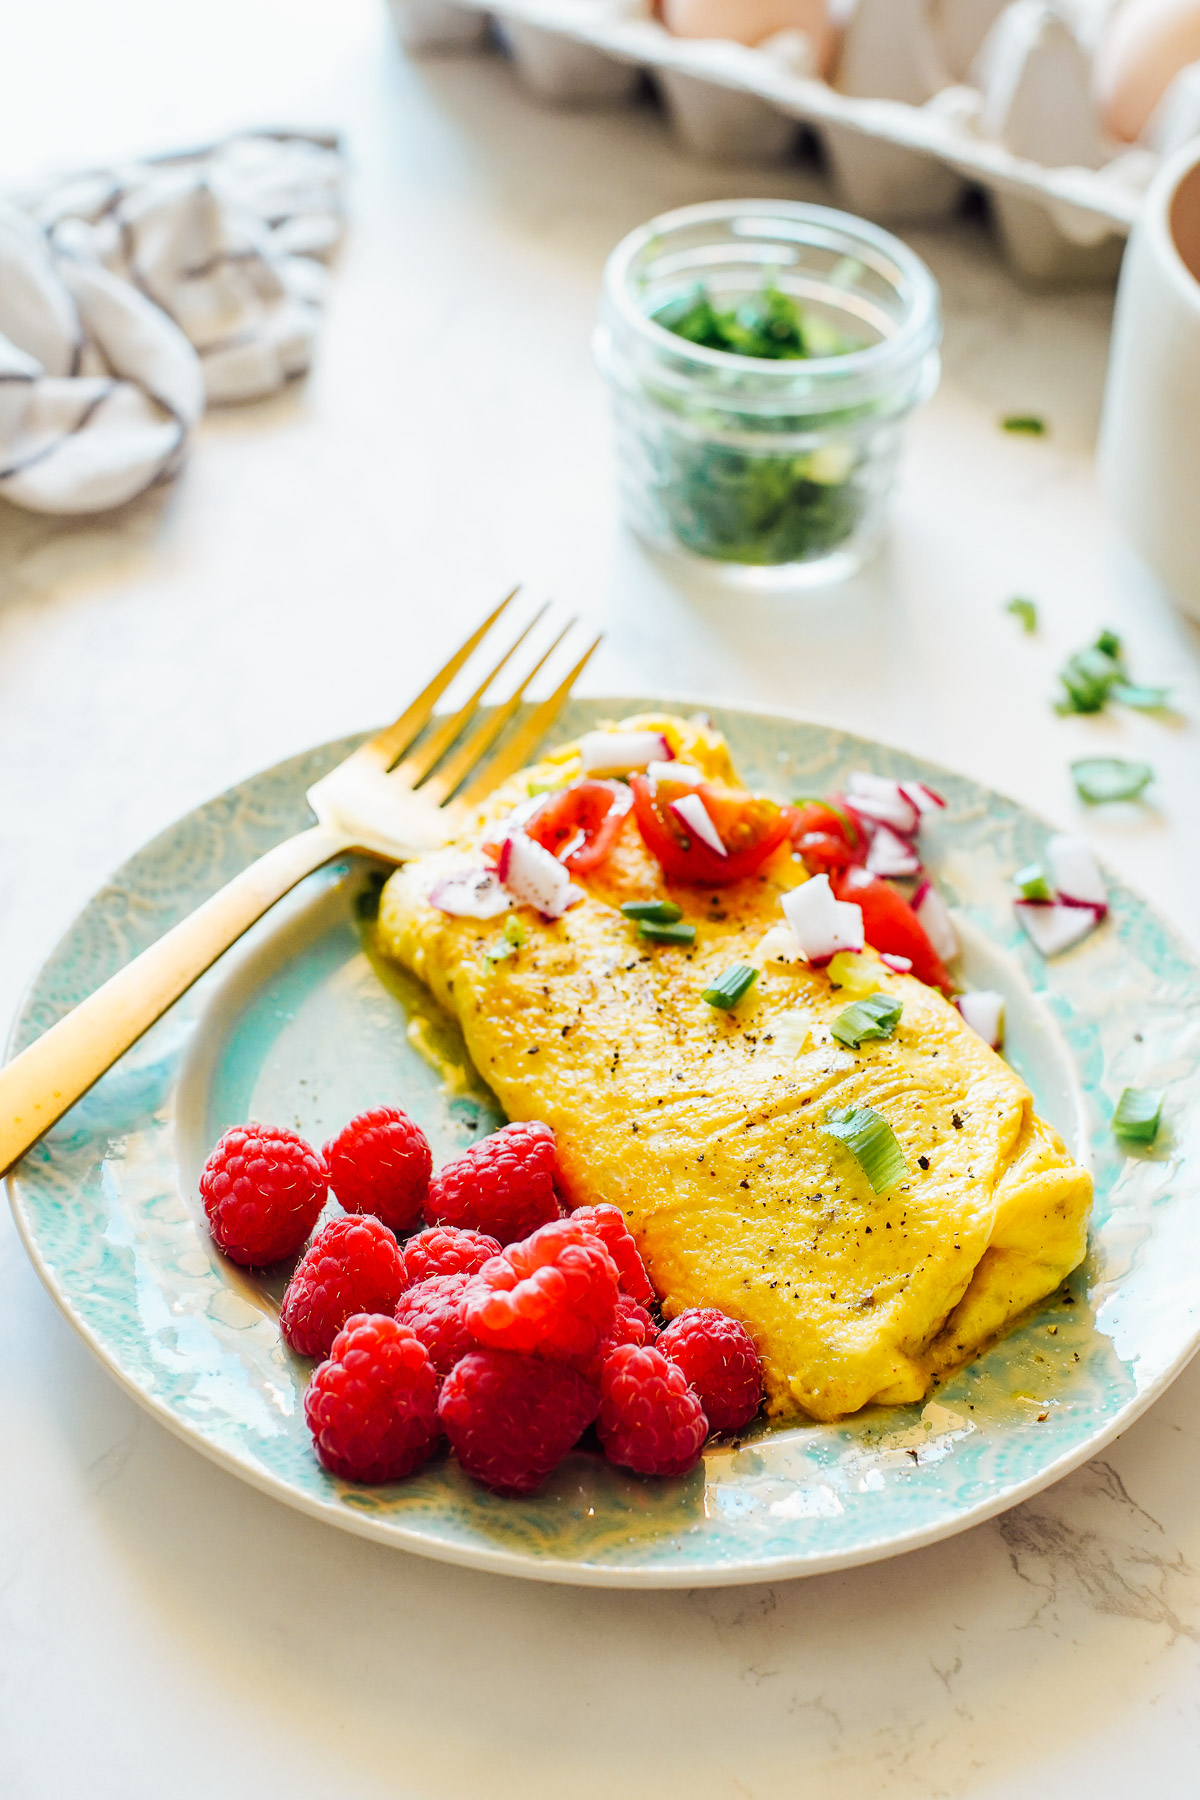 Cheese Omelette on a Blue Plate with raspberries on the side.